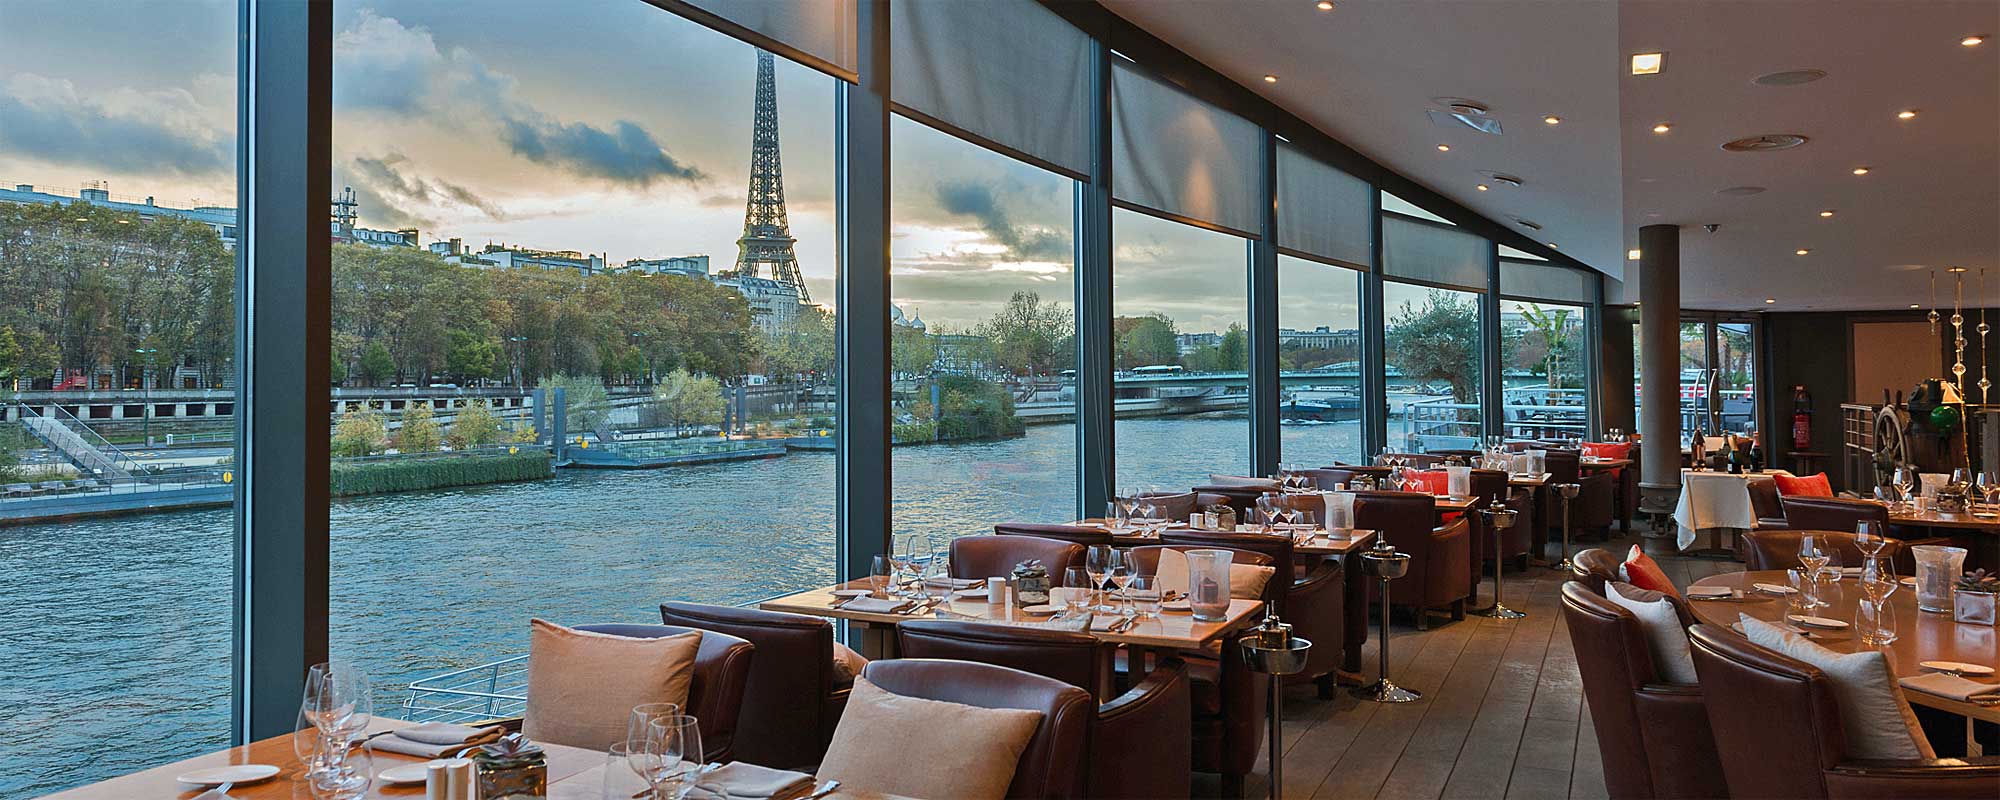 Restaurant with a view of the Seine River & the Eiffel Tower